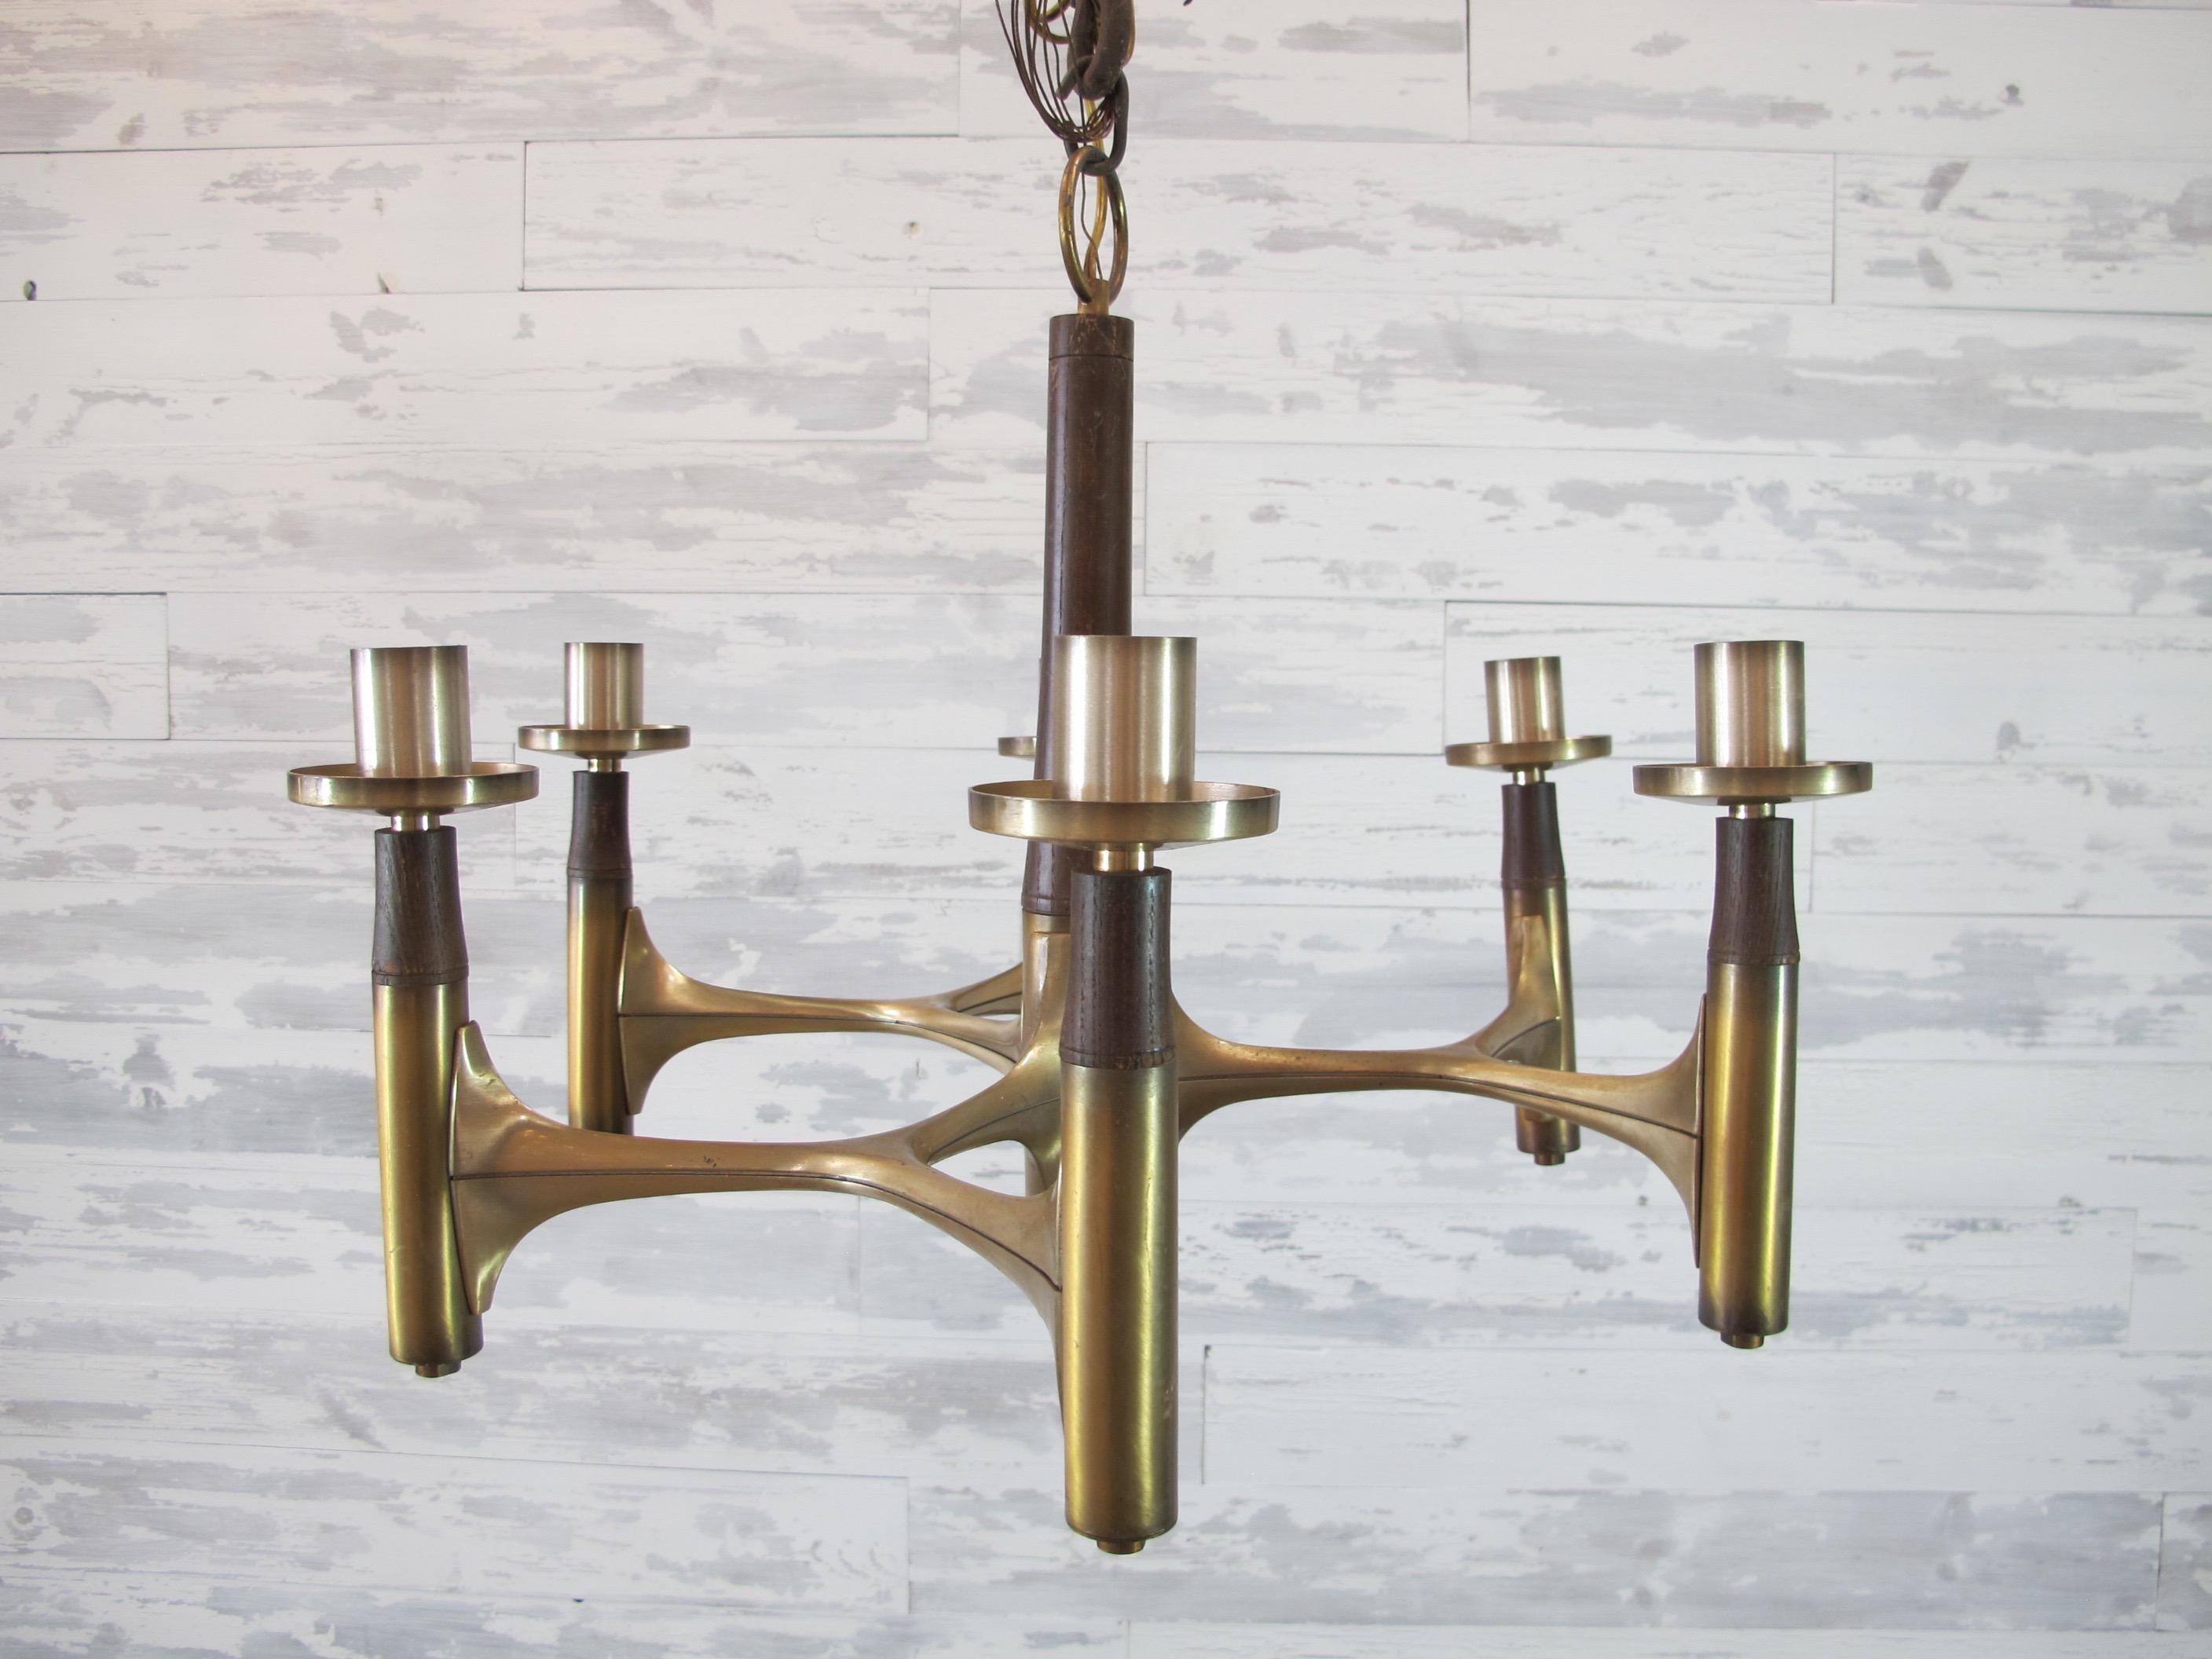 Great Mid-Century Modern brass and wood chandelier. Six lights with standard sockets up to 60 watts. This piece has been newly wired and is UL approved with chain and canopy. Everything else on the chandelier is original. The piece has aging but is